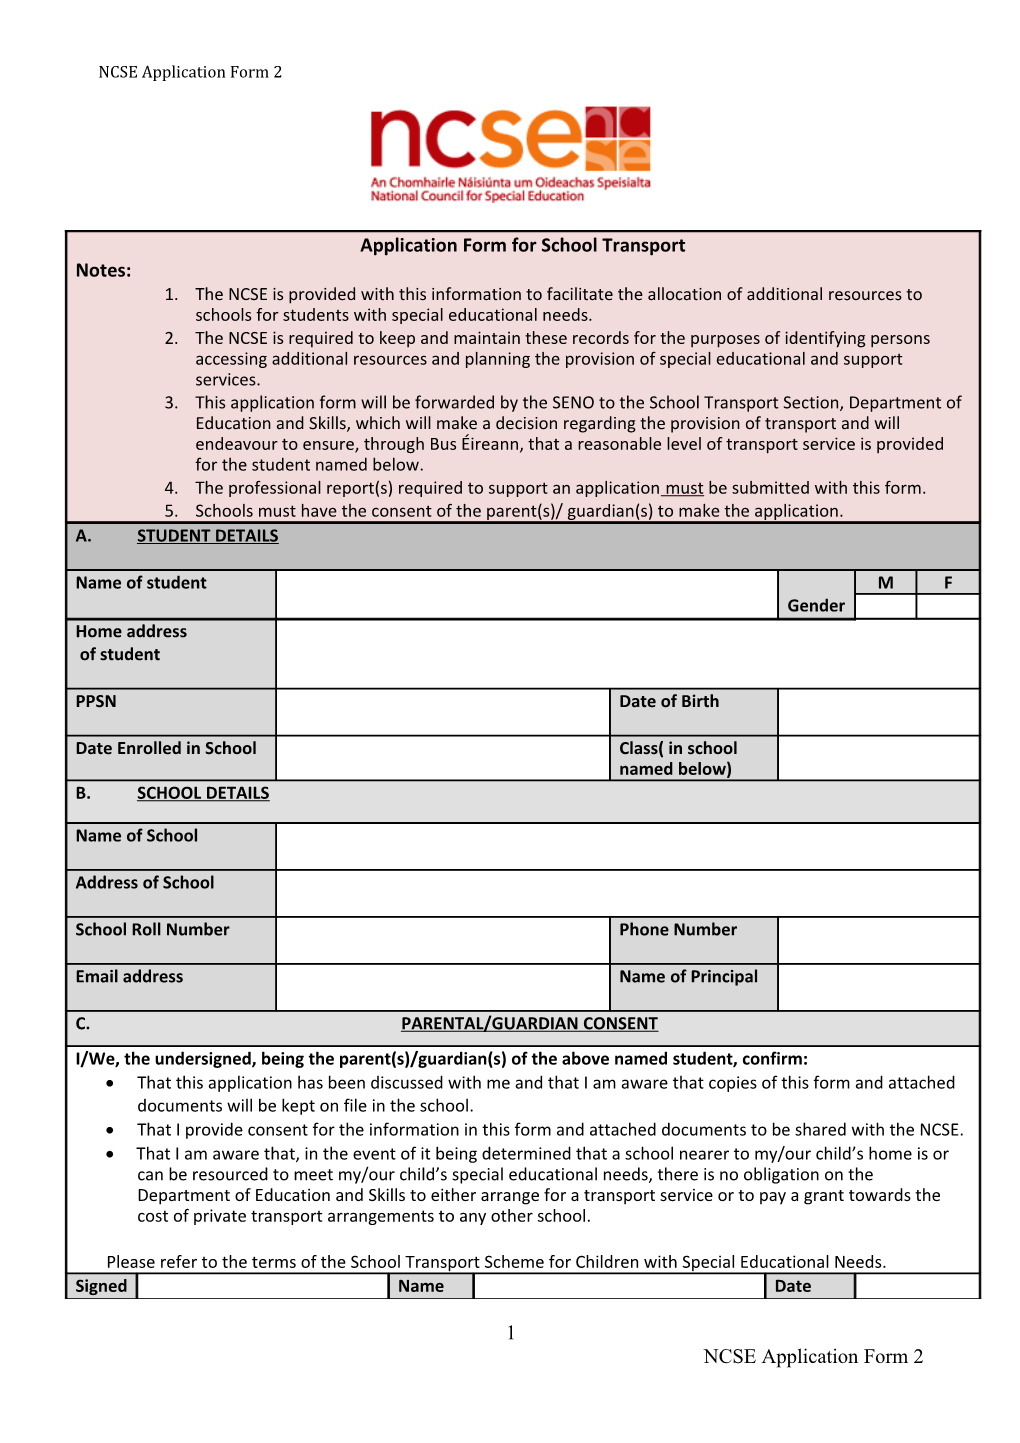 The Professional Report(S) Requiredto Support an Application Must Be Submitted with This Form